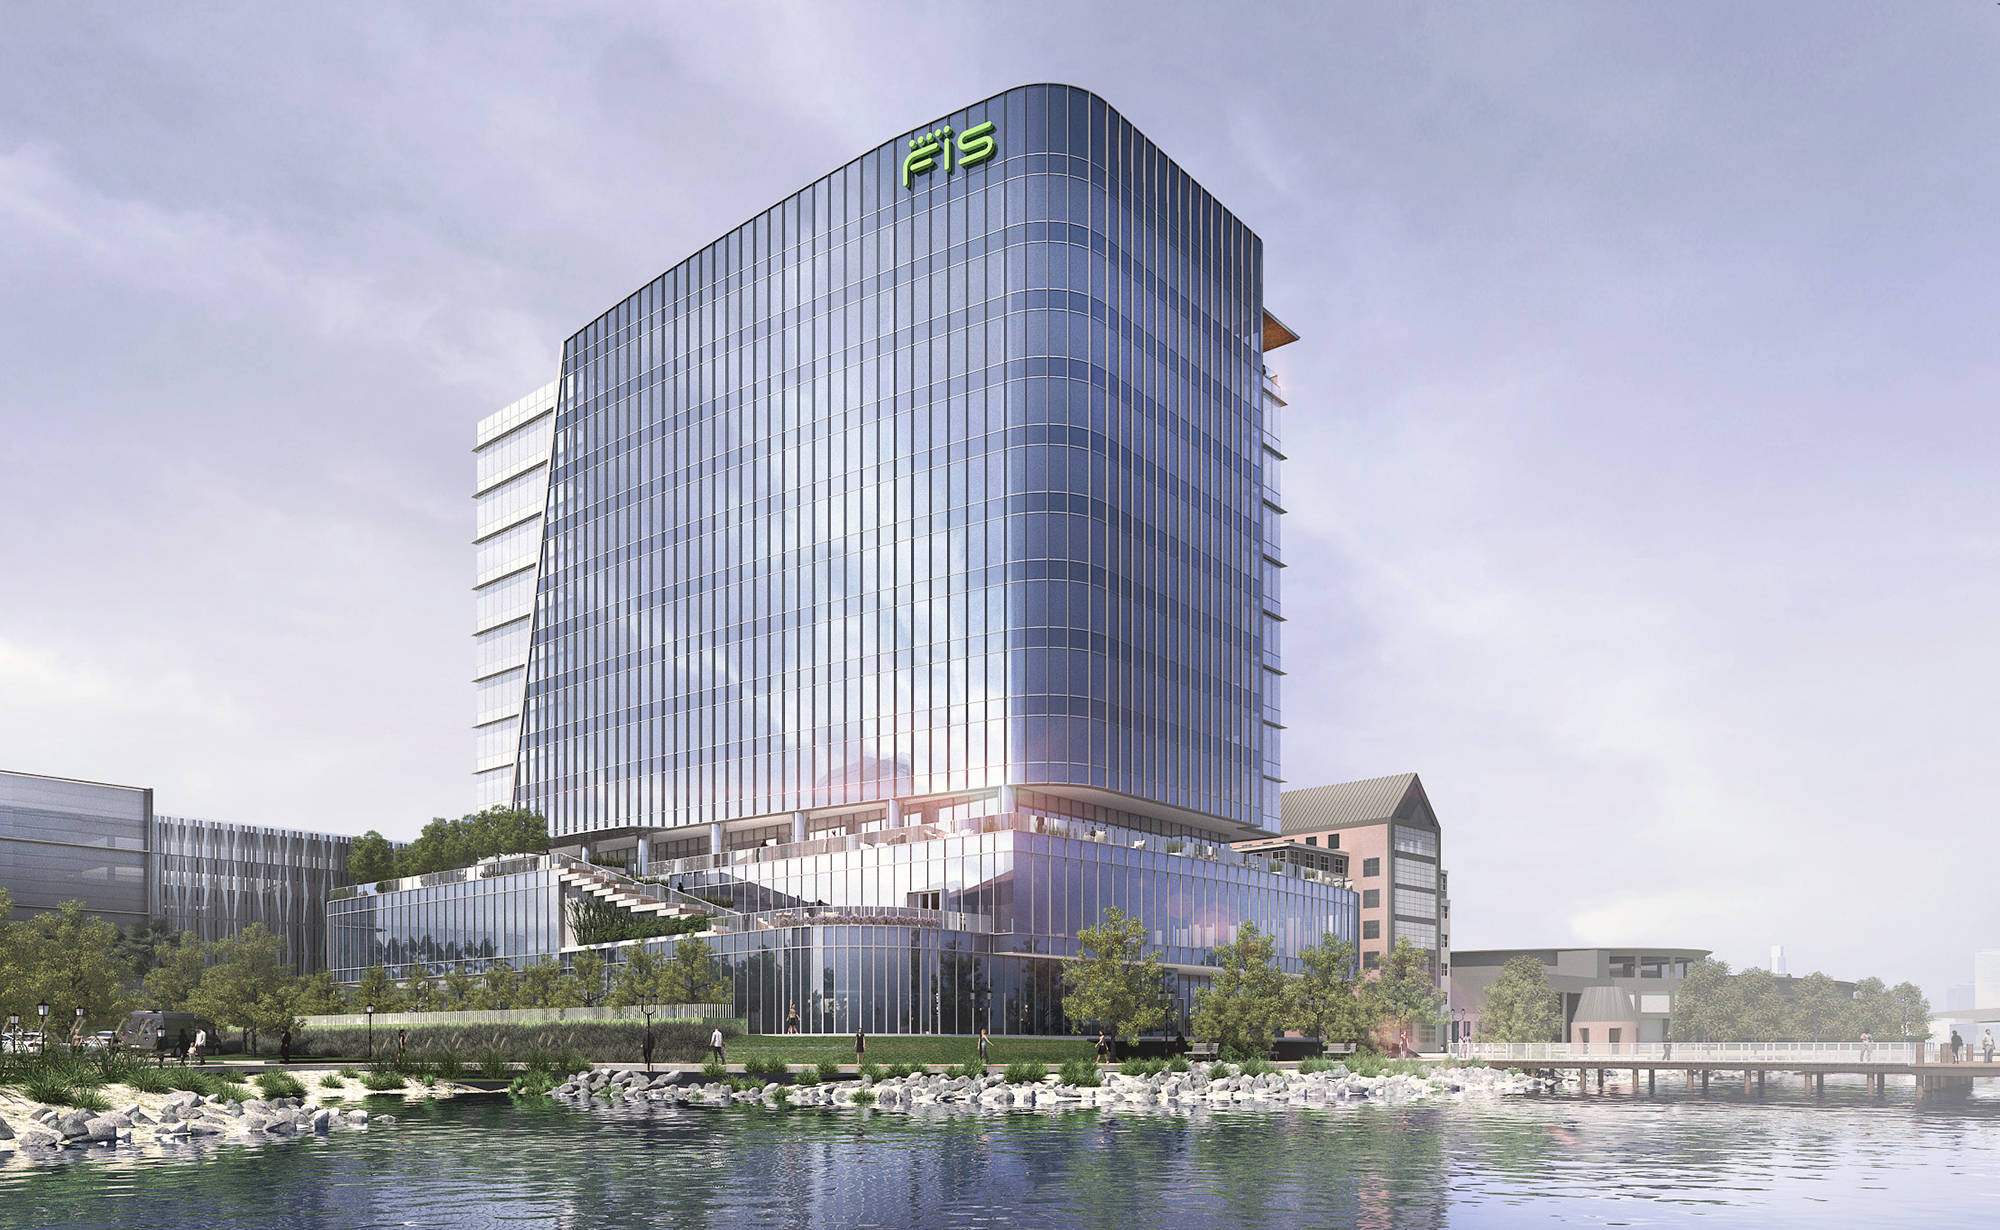 The parking structure is part of the planned $145 million FIS headquarters at 323 Riverside Ave.